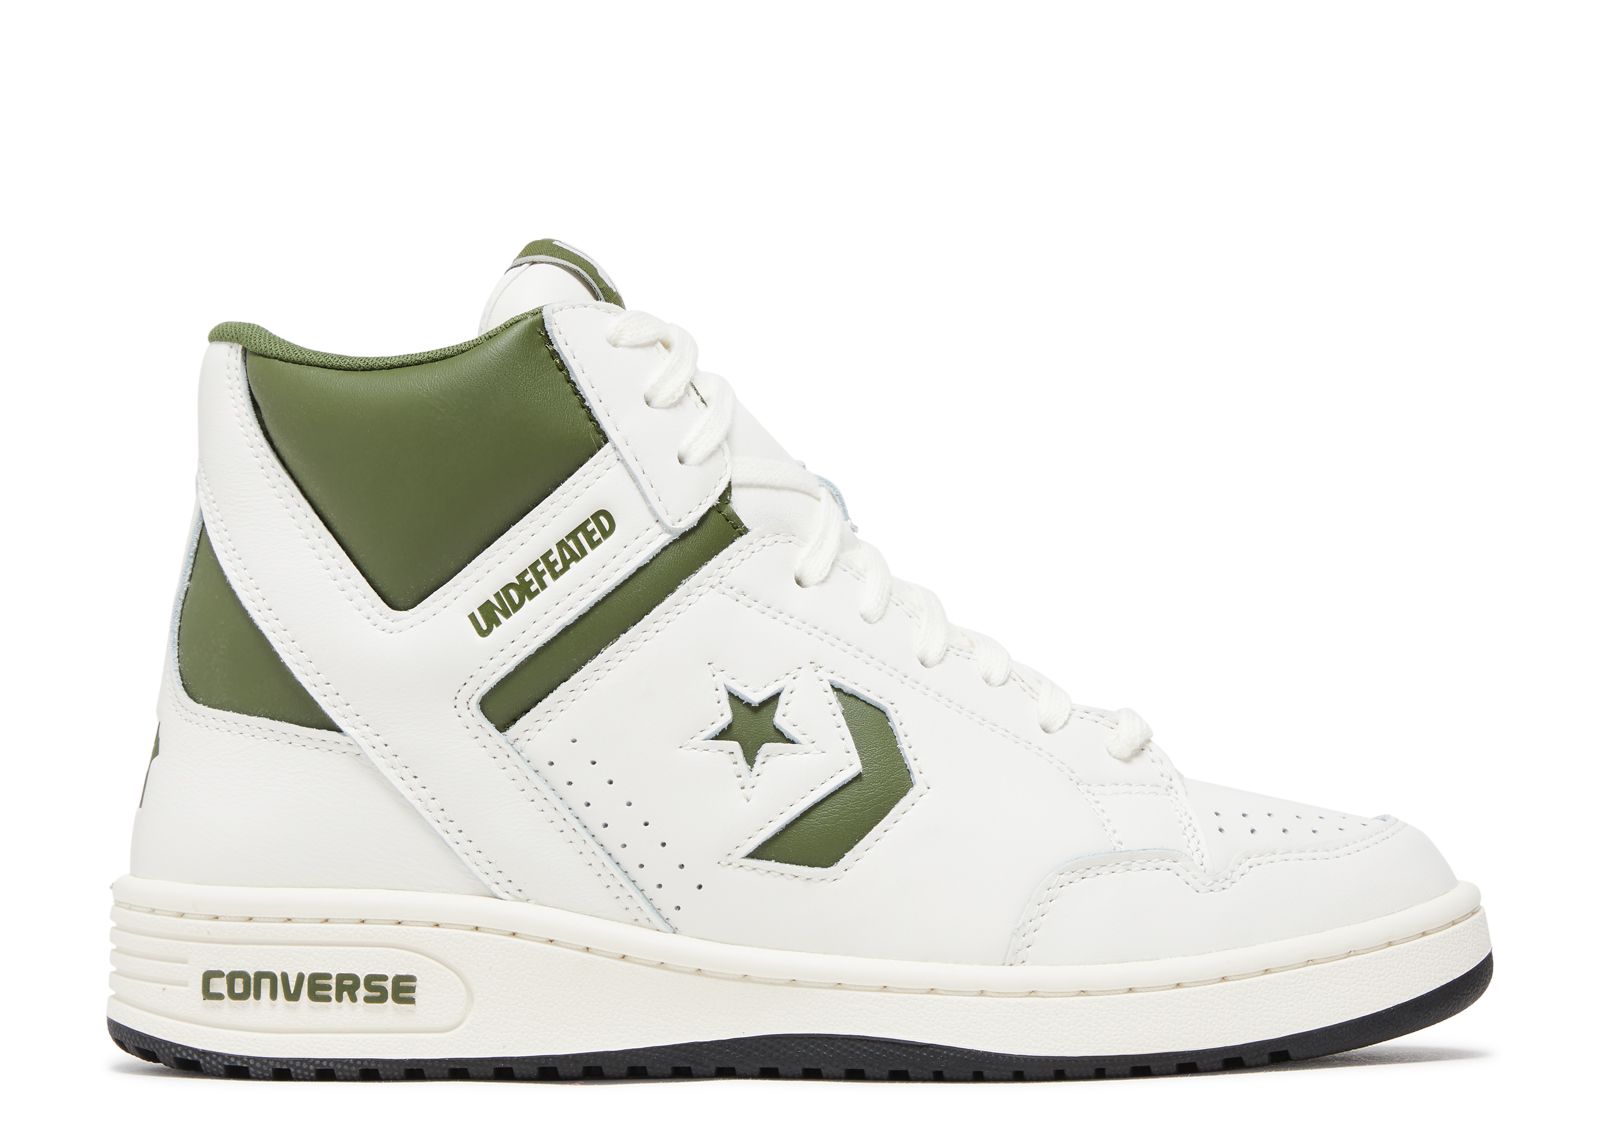 цена Кроссовки Converse Undefeated X Weapon High 'Chive', белый